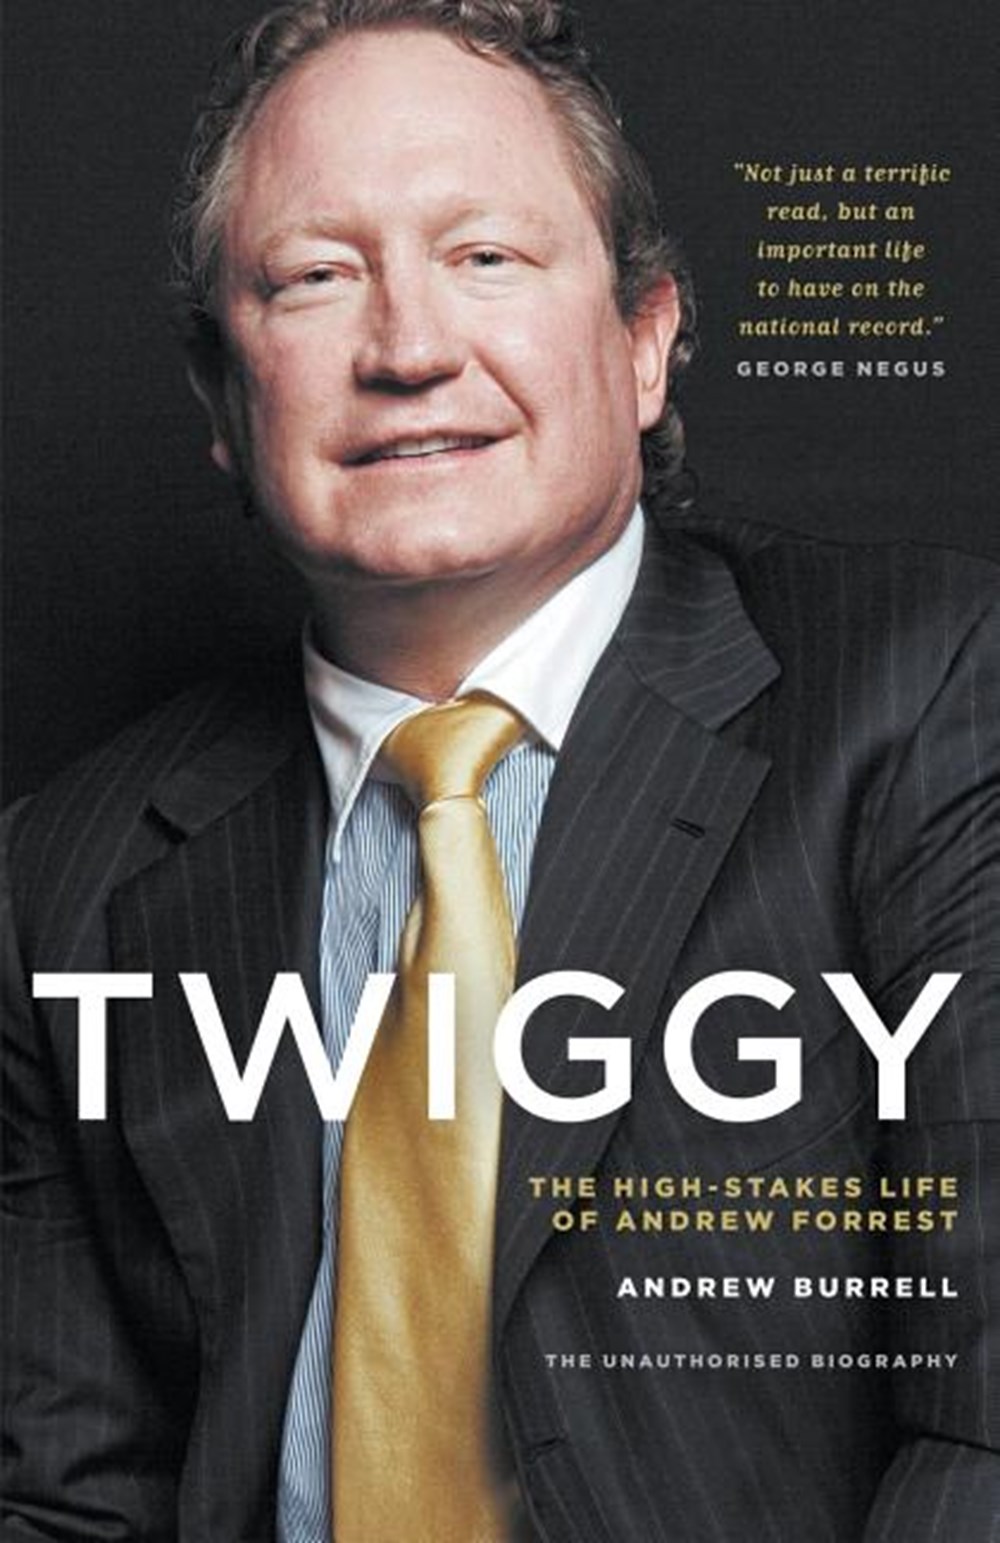 Twiggy The High-Stakes Life of Andrew Forrest